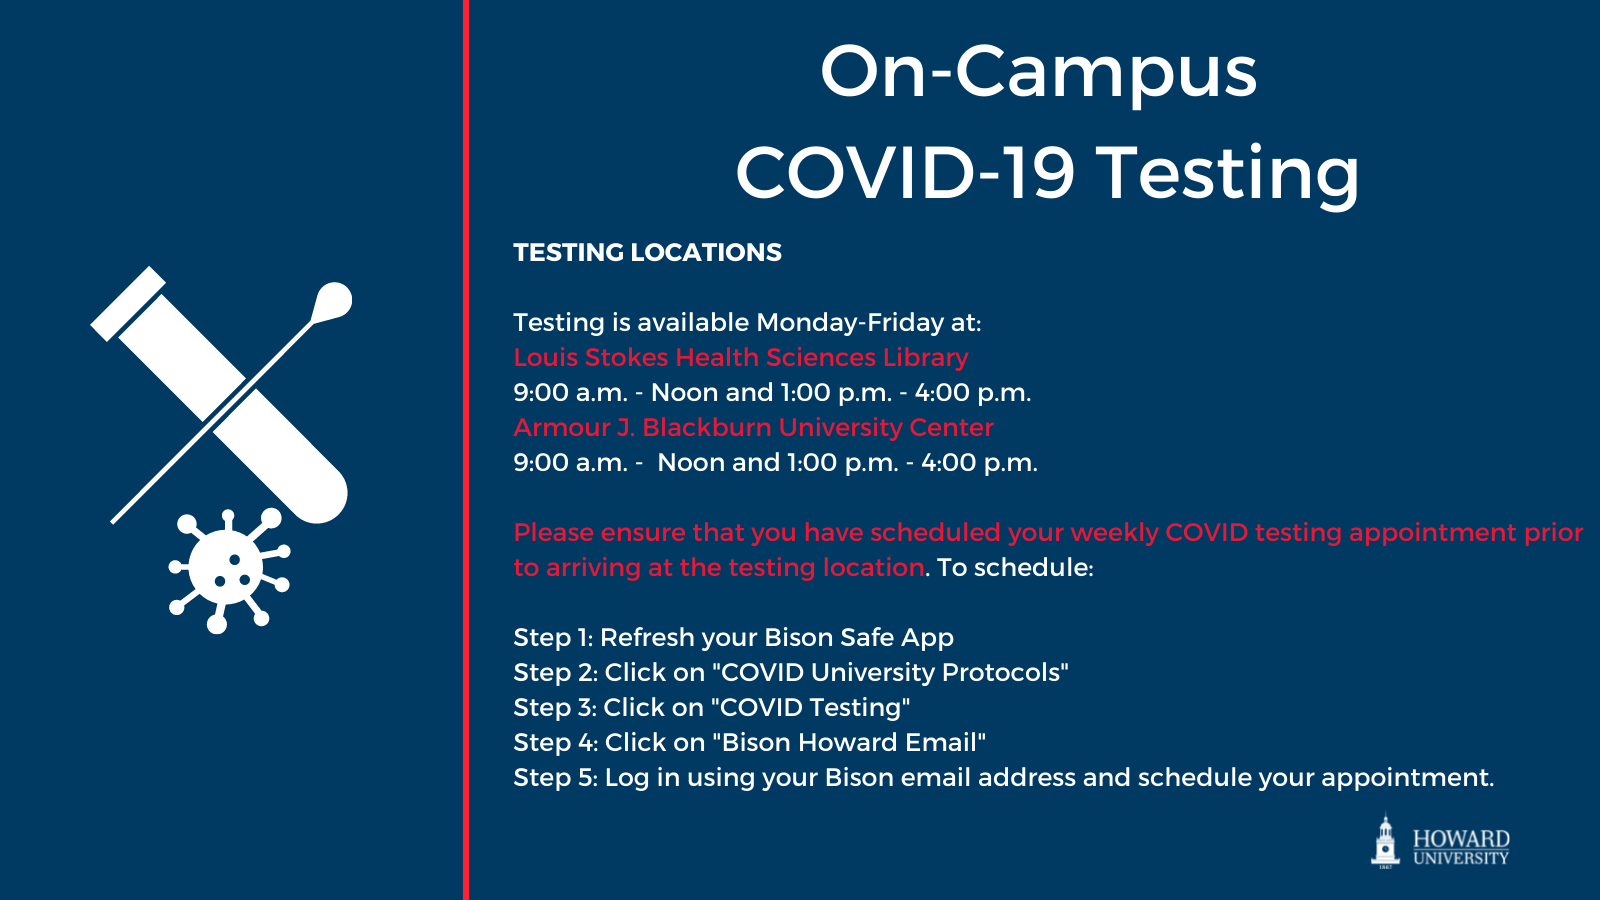 On-Campus COVID-19 testing locations: Monday-Friday at Louis Stokes Health Sciences Library, 9 a.m. - noon and 1 p.m. - 4 p.m; Armour J Blackburn University Center 9 a.m. - noon and 1 p.m. - 4 p.m. Please ensure that you have scheduled your weekly testing appointment prior to arriving at the testing location.